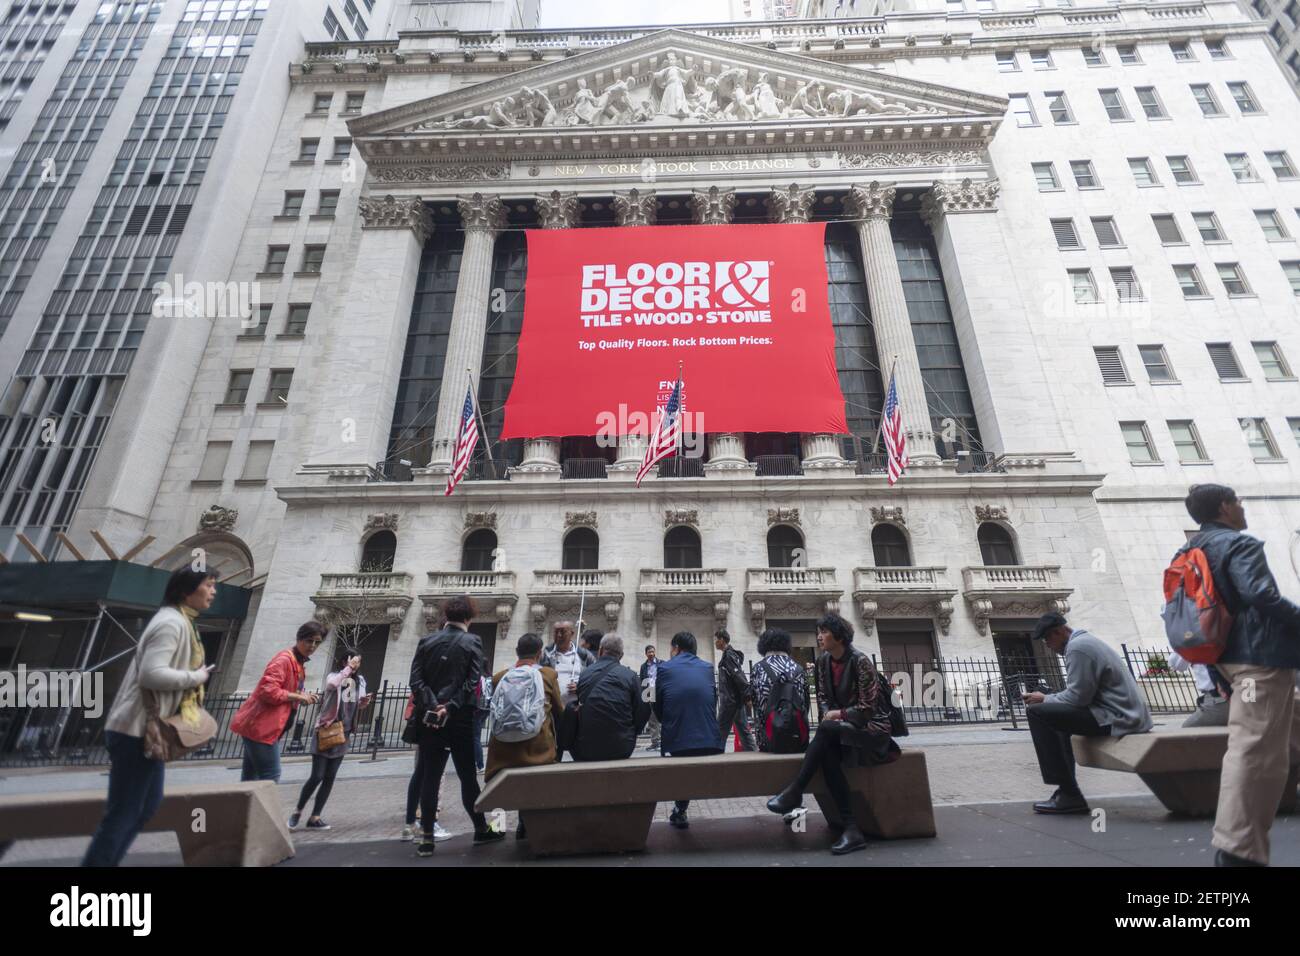 The facade of the New York Stock Exchange is decorated for the first day of  trading for Floor & Decor Holding's initial public offering on Thursday,  April 27, 2017. Floor & Decor